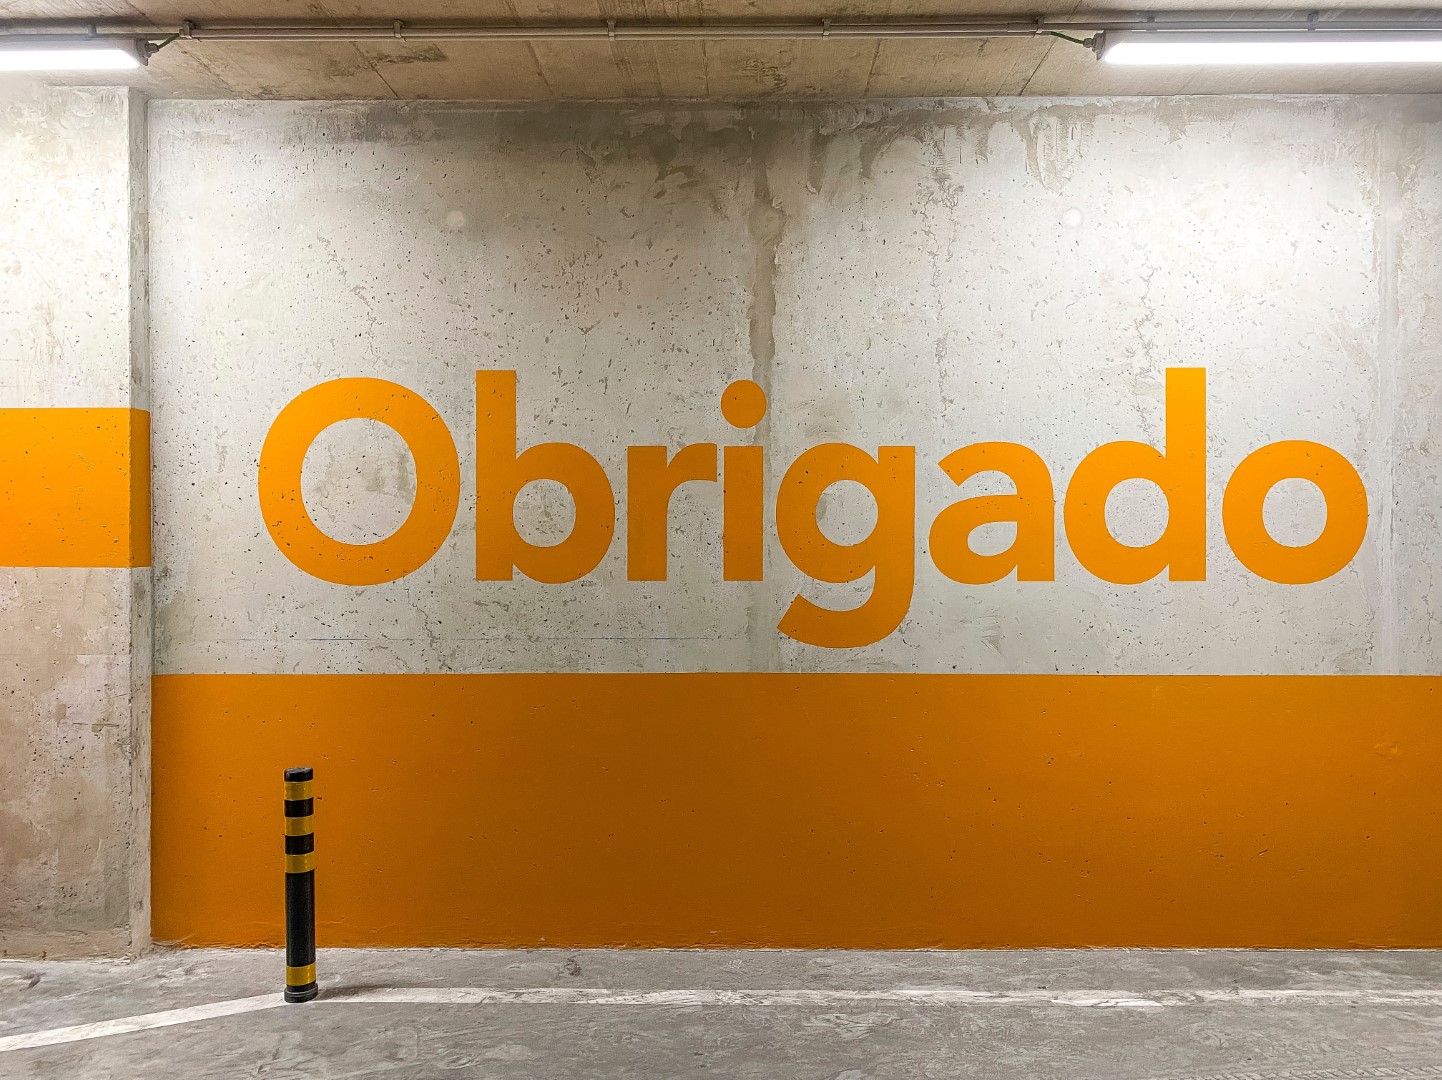 Cover image of the article: Useful Algarve Expressions for the Holidays. In the picture, the word \obrigado\ appears on a wall in the colour yellow. It means \thank you\ in Portuguese.